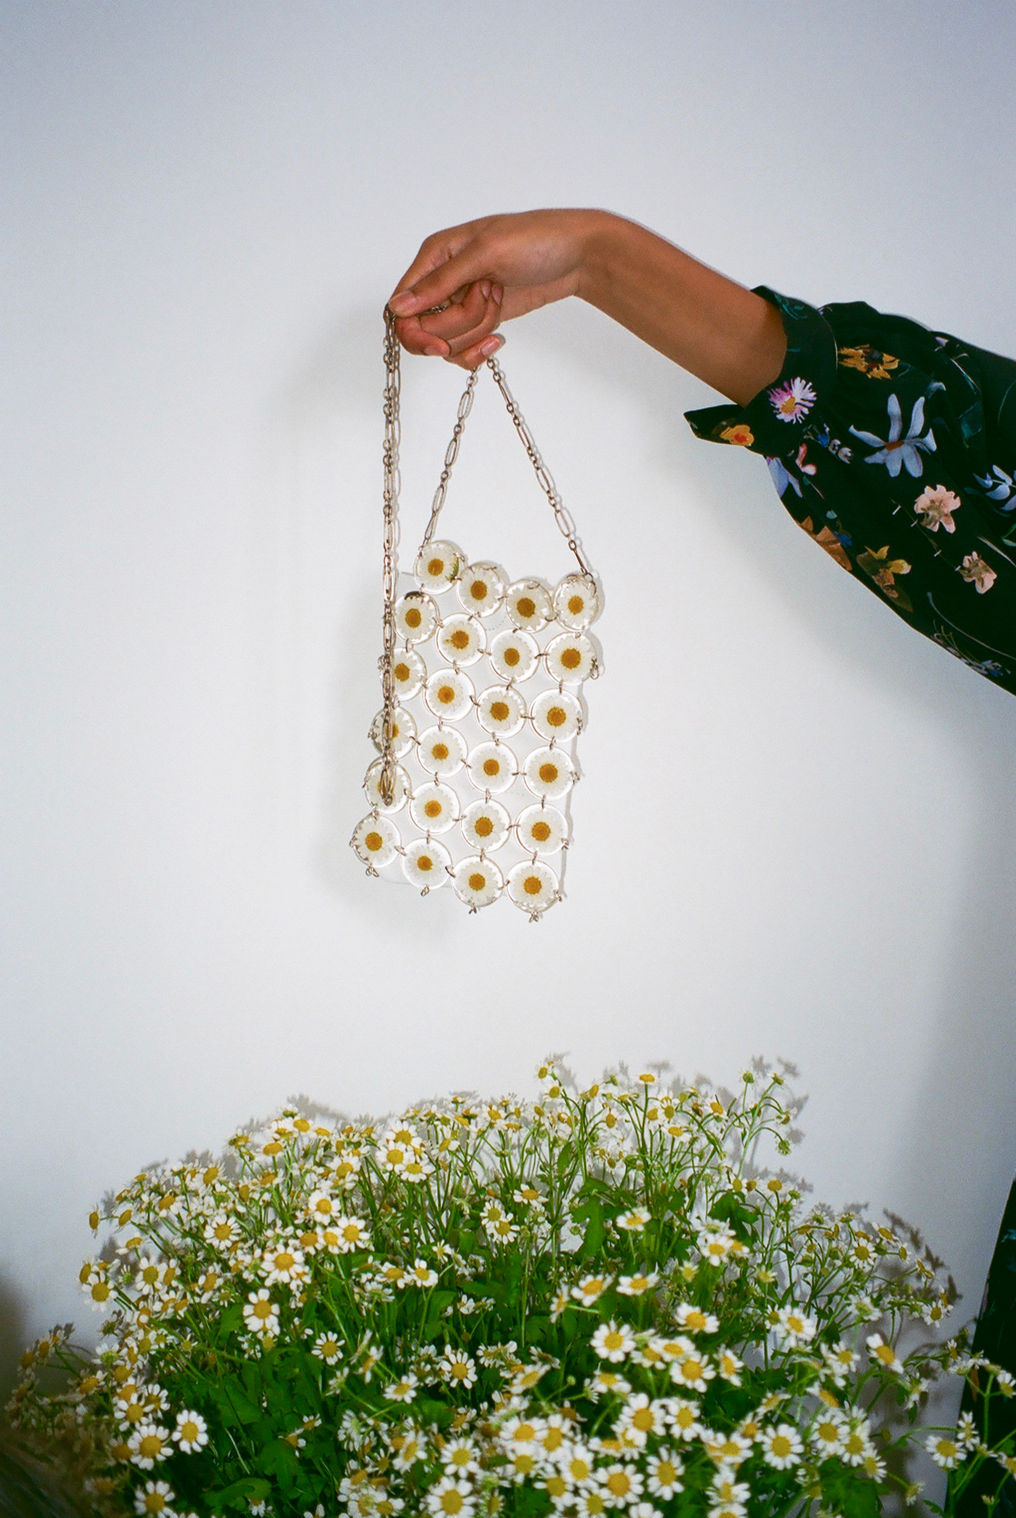 Small Daisy Chainmaille Bag